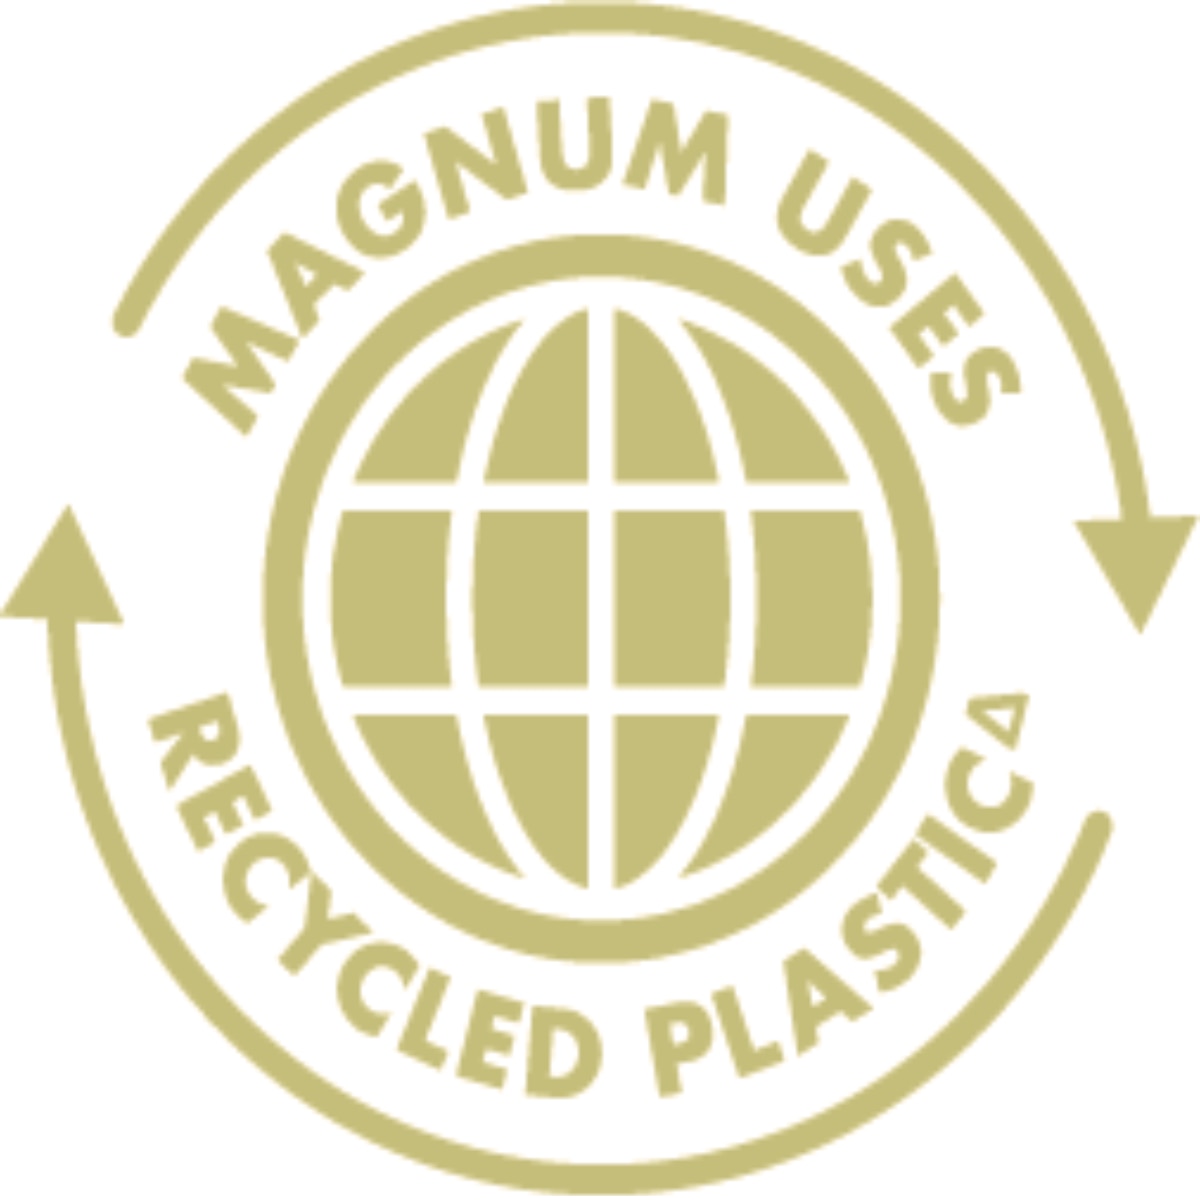 Magnum uses recycled plastic Text